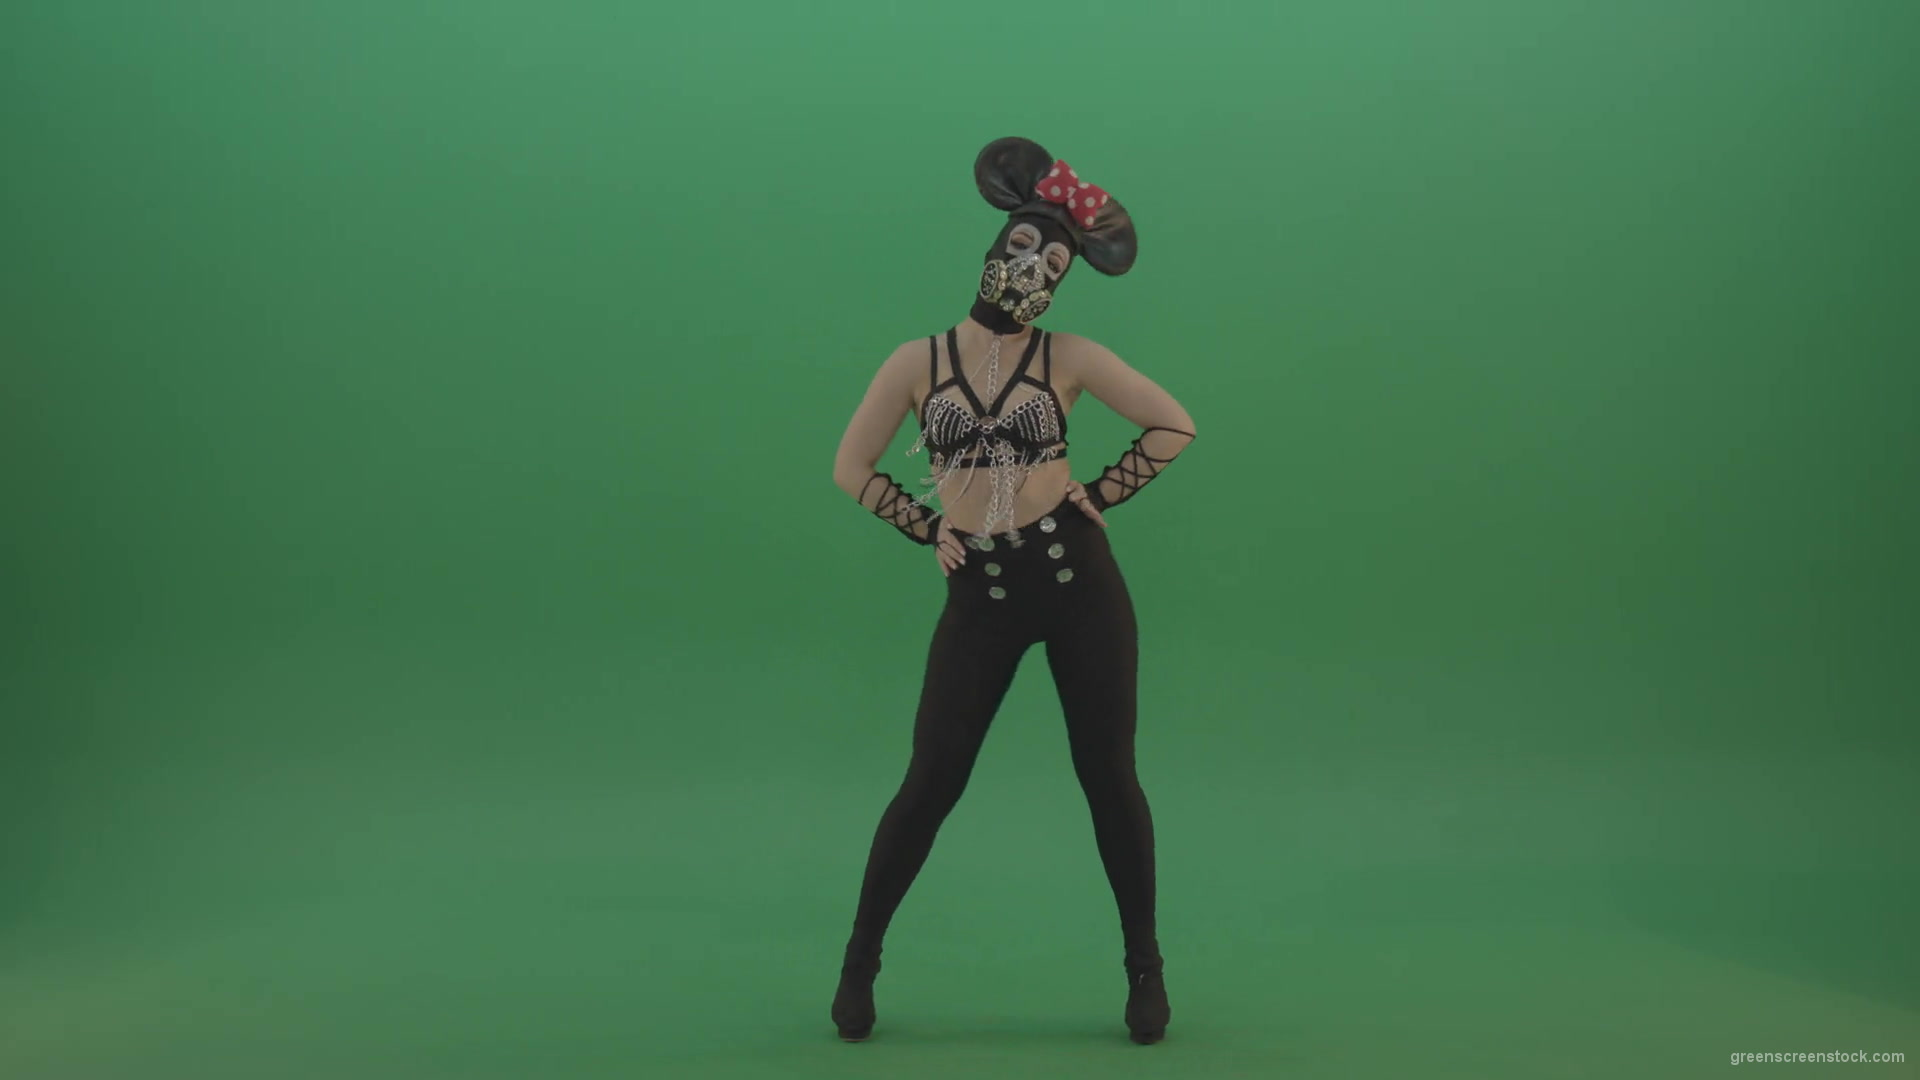 Mickey-Mouse-girl-dancing-cyclically-in-the-sides-of-a-sexy-costume-on-green-screen-1920_006 Green Screen Stock